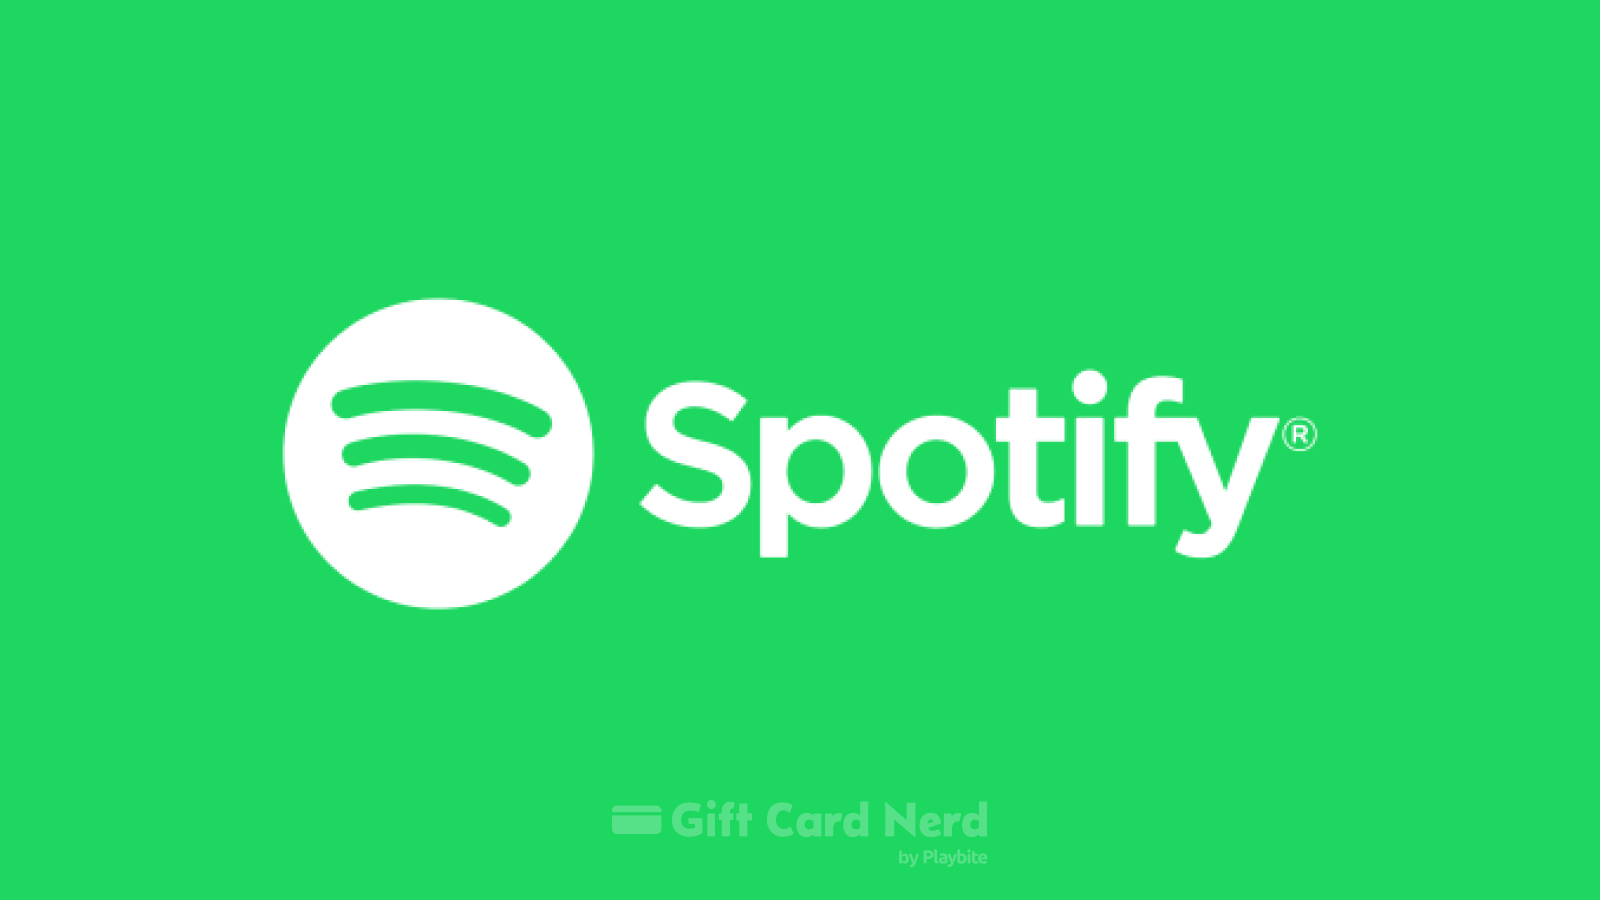 Can You Use a Spotify Gift Card on DoorDash?